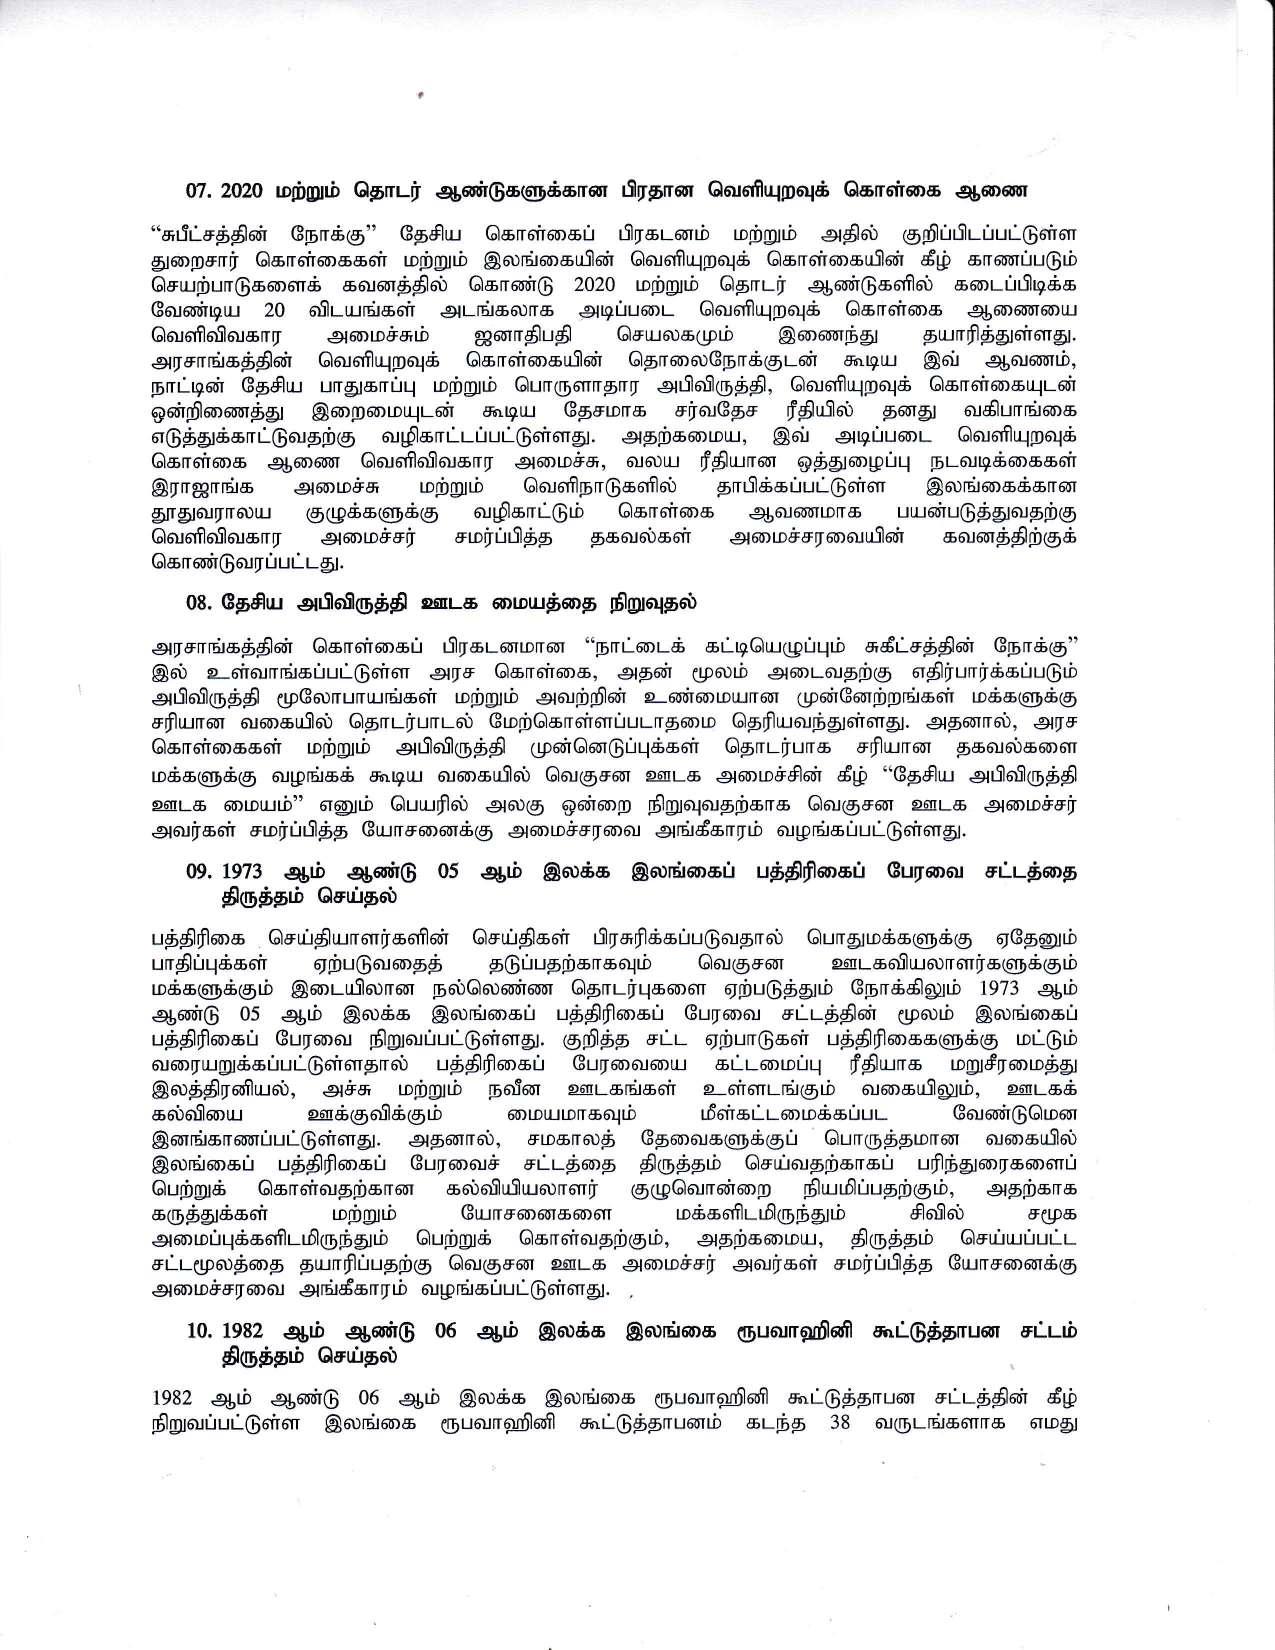 Cabinet Decision on 04.01.2021 Tamil page 003